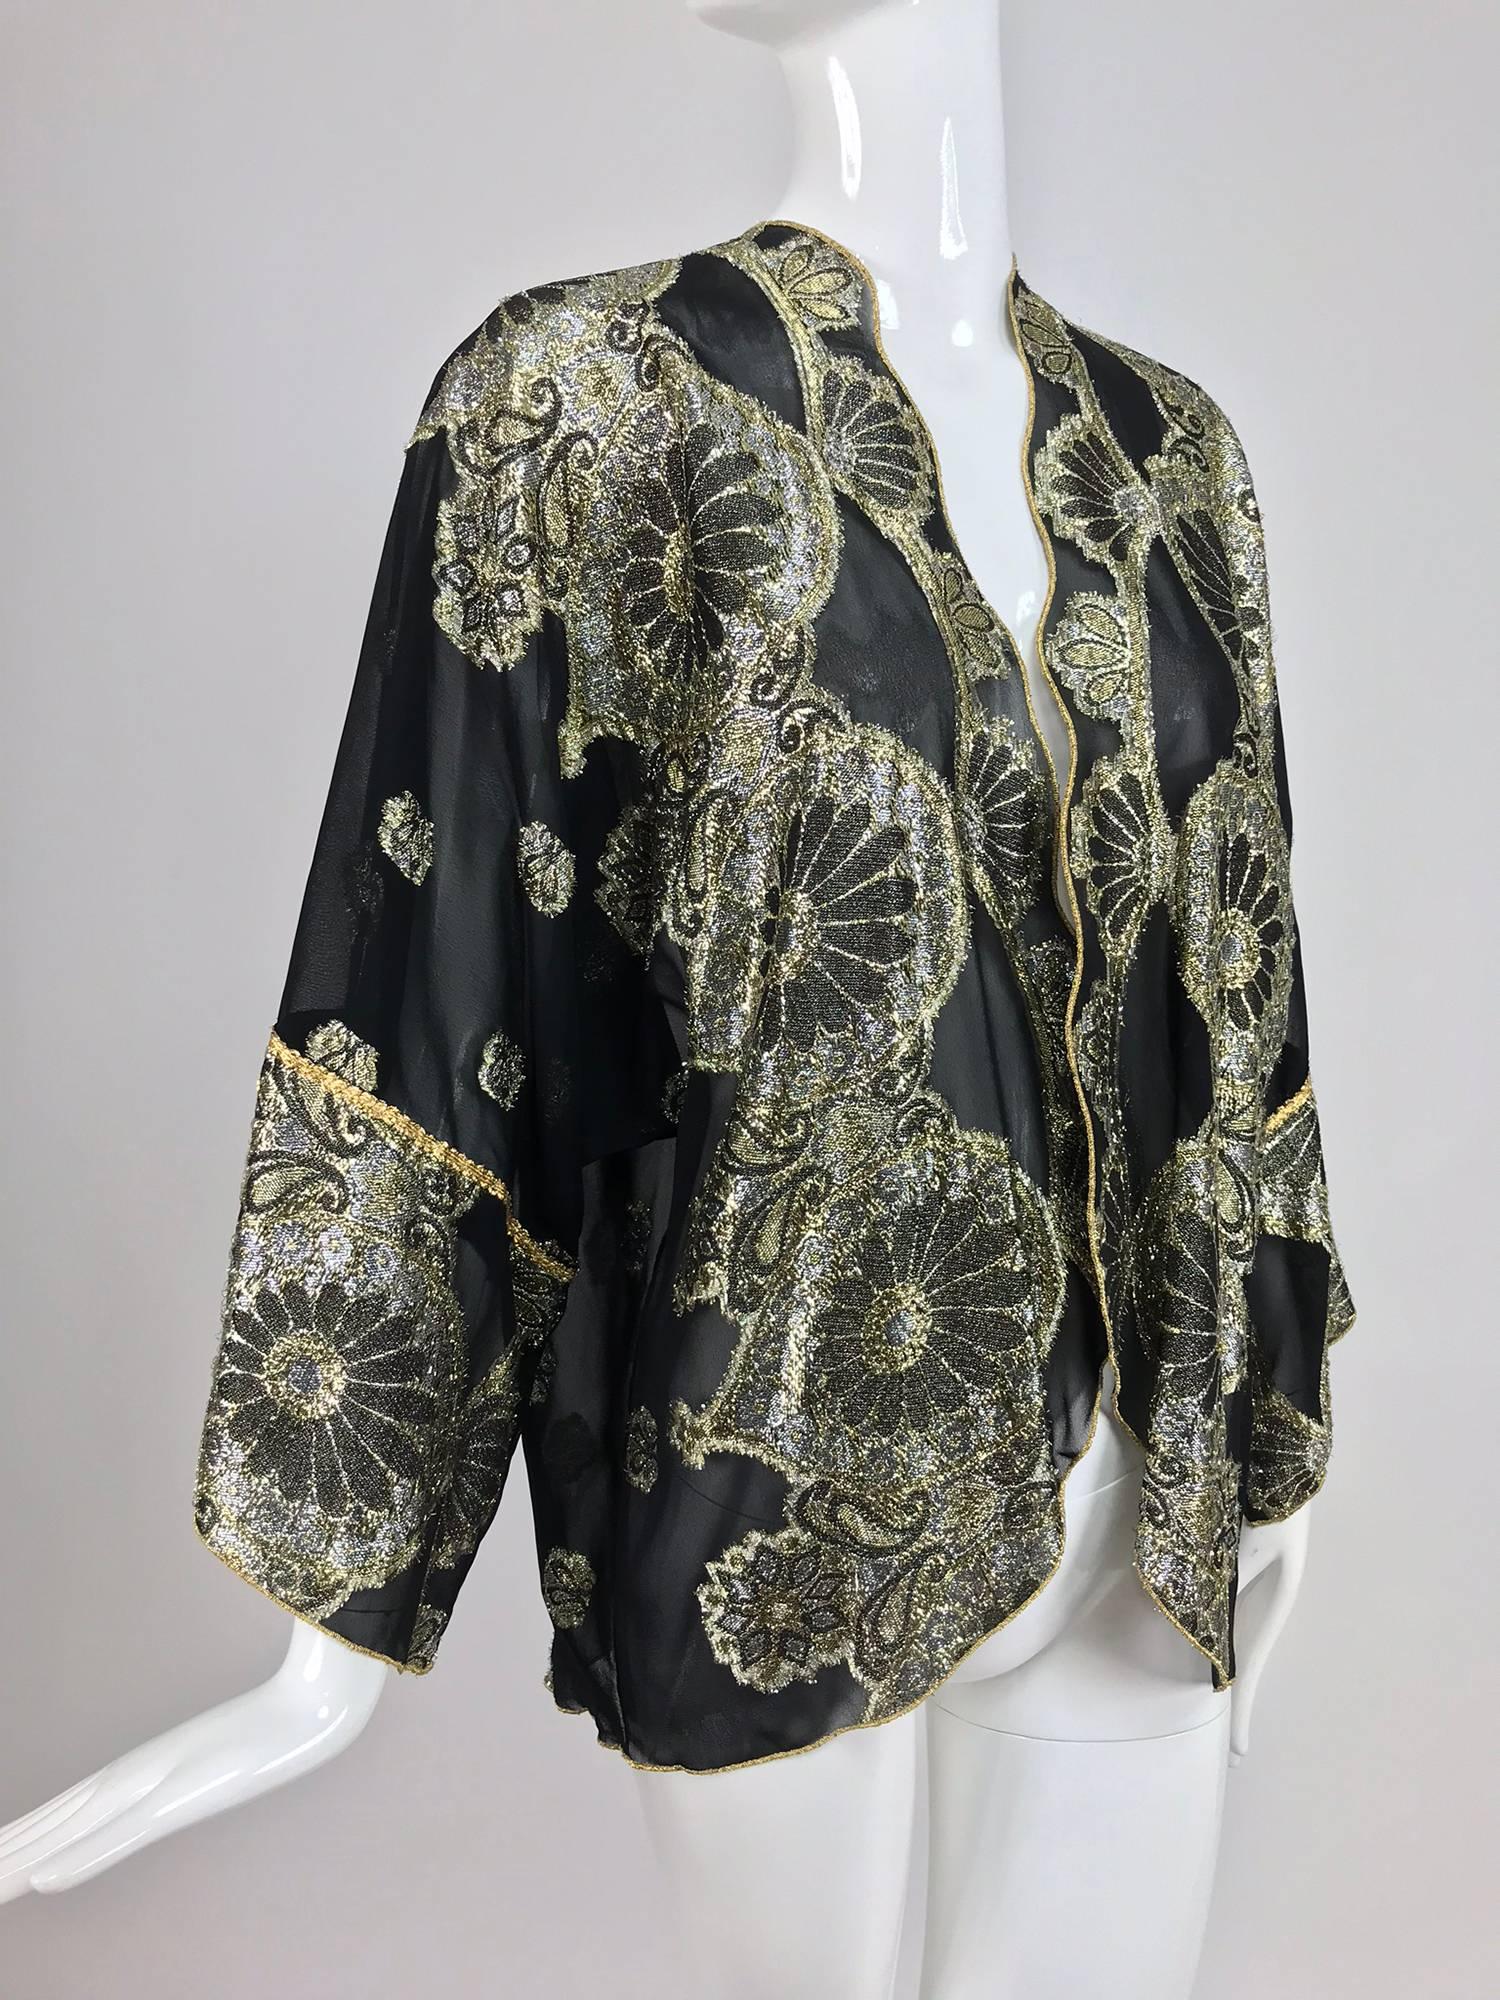 Vintage black chiffon with silver and gold metallic pattern kimono style jacket from the 1970s...Unlined, open front jacket is perfect for layering...Sheer chiffon with woven metallic designs...Fits a size small-medium
In excellent wearable